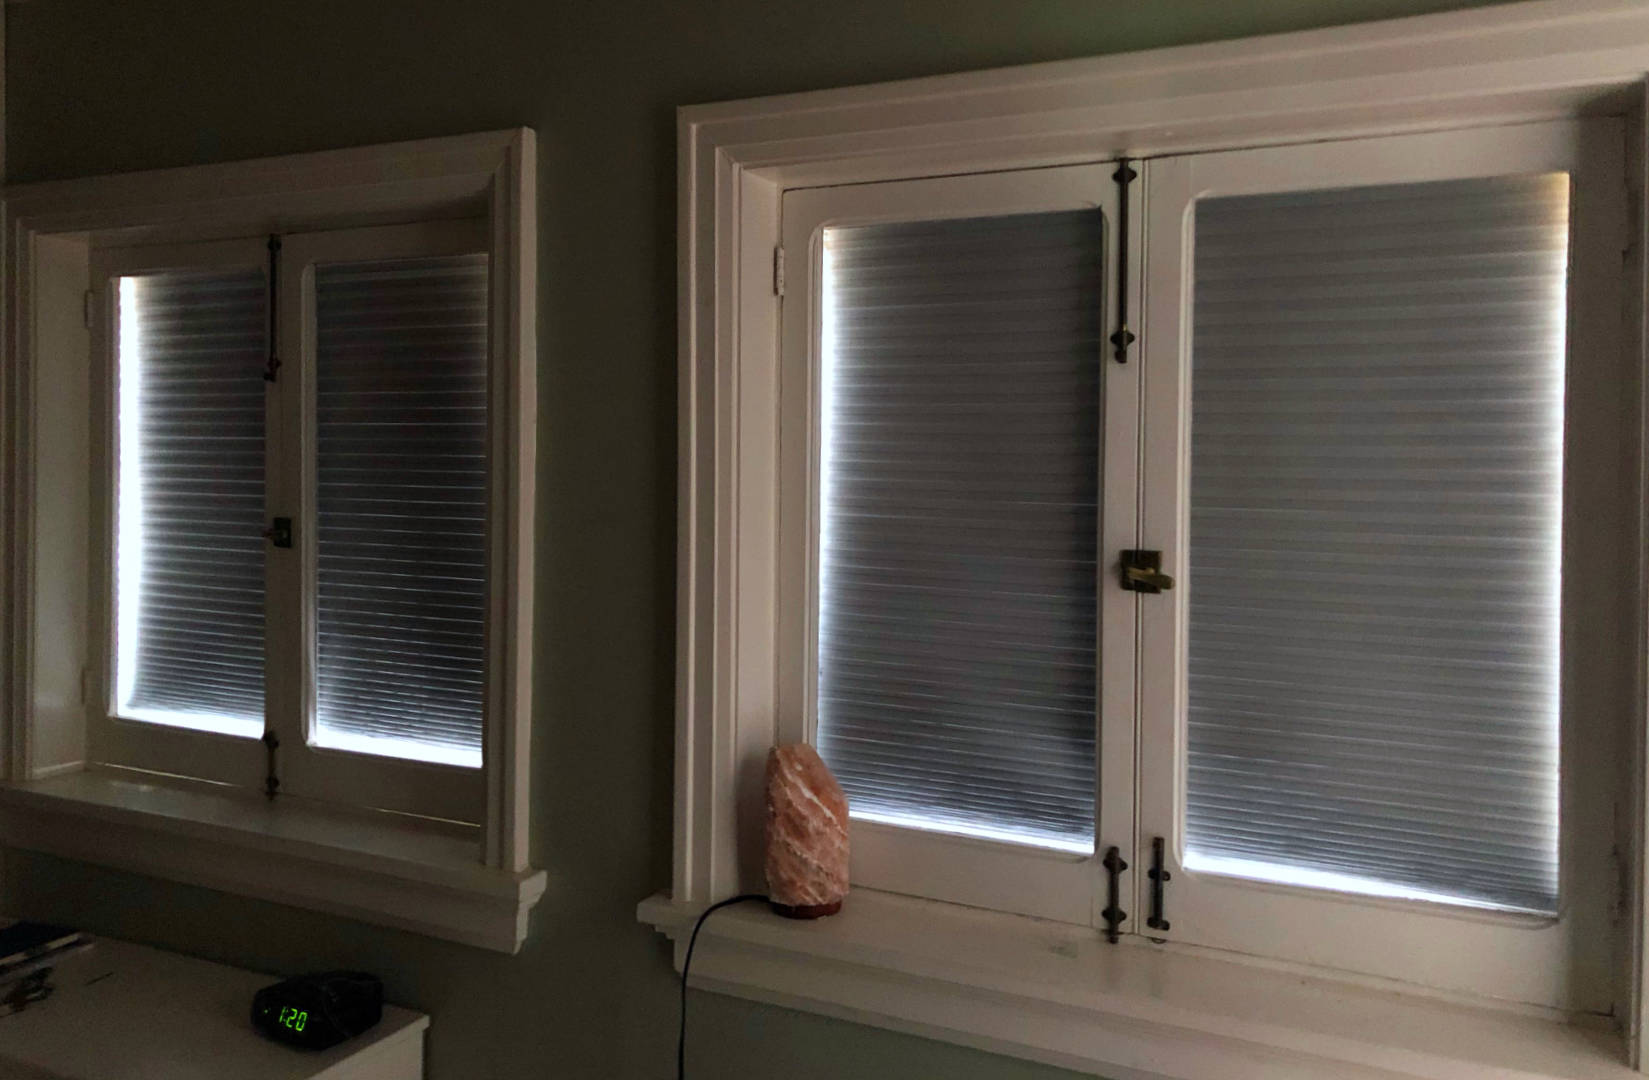 Two new blackout cellular shades installed in our bedroom. They replaced old metal blinds that were stained and bent!